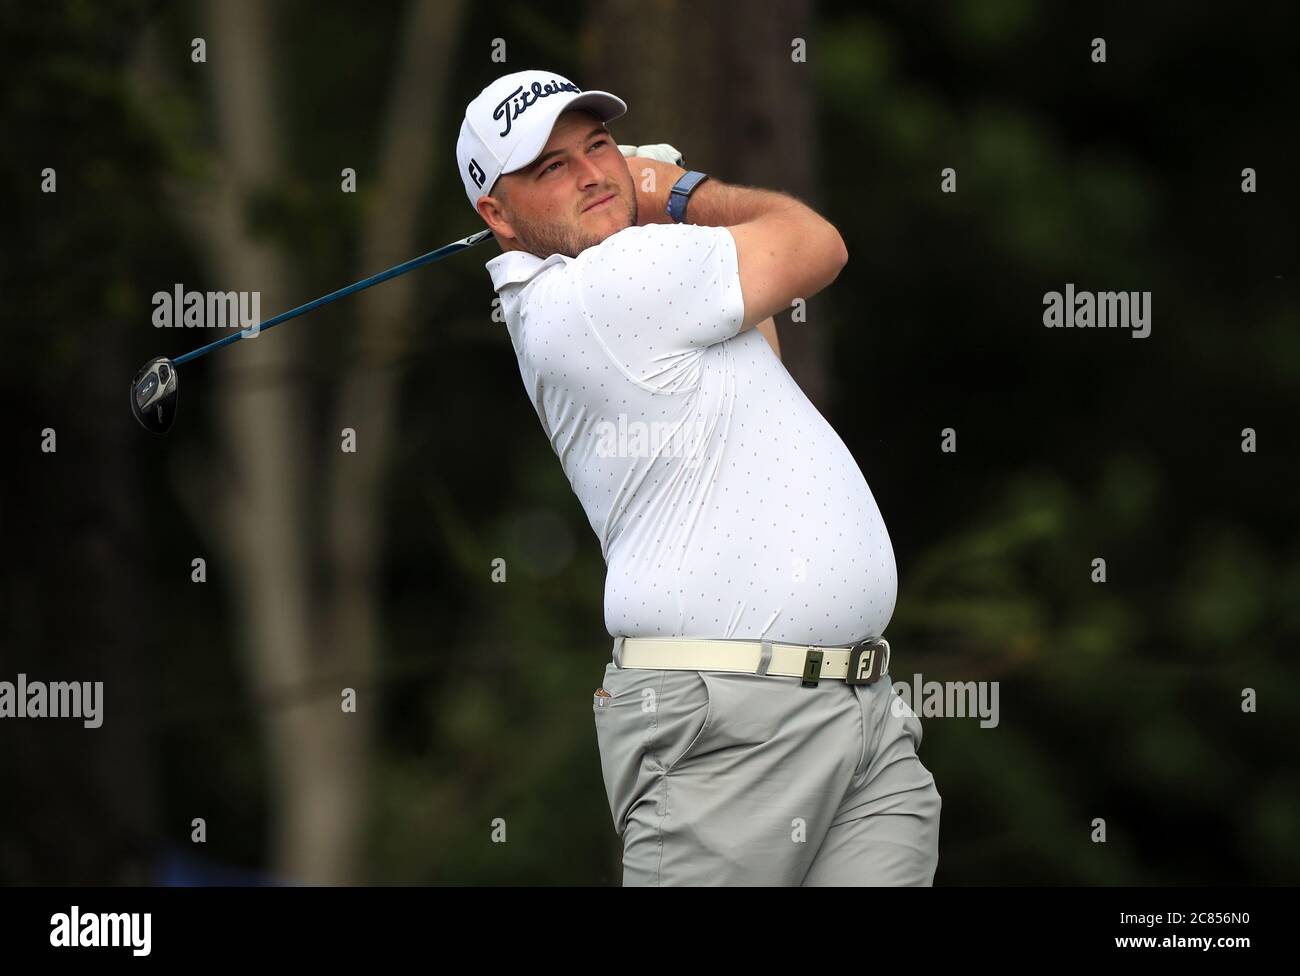 Zander Lombard during a practice round at Close House Golf Club, Newcastle  Stock Photo - Alamy